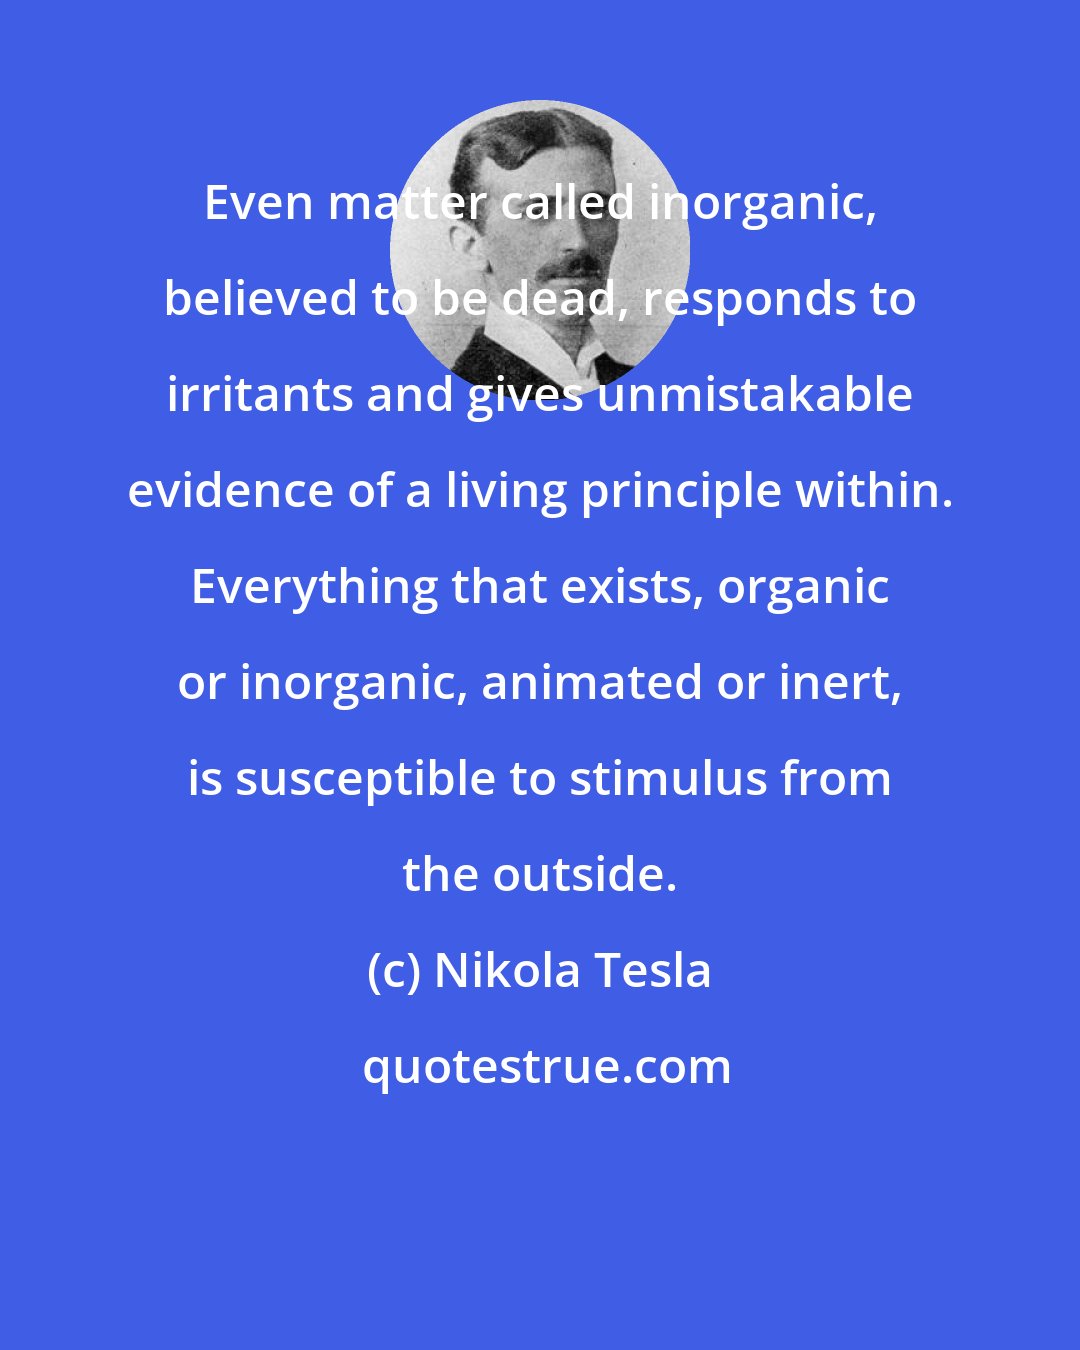 Nikola Tesla: Even matter called inorganic, believed to be dead, responds to irritants and gives unmistakable evidence of a living principle within. Everything that exists, organic or inorganic, animated or inert, is susceptible to stimulus from the outside.